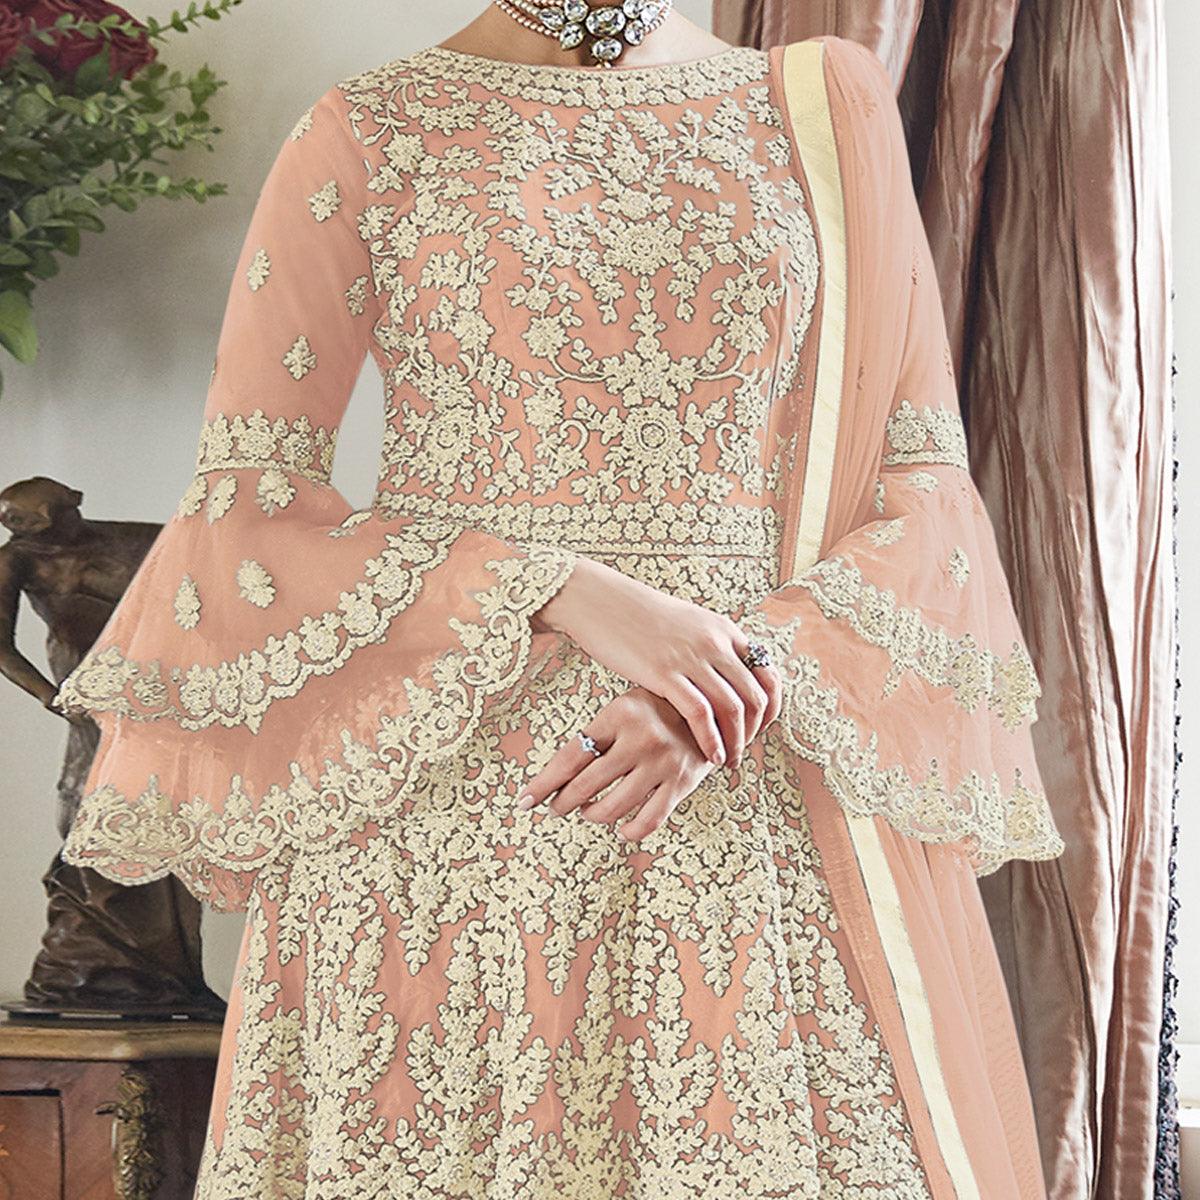 Peach Partywear Floral Embroidered Net Sharara Suit - Peachmode